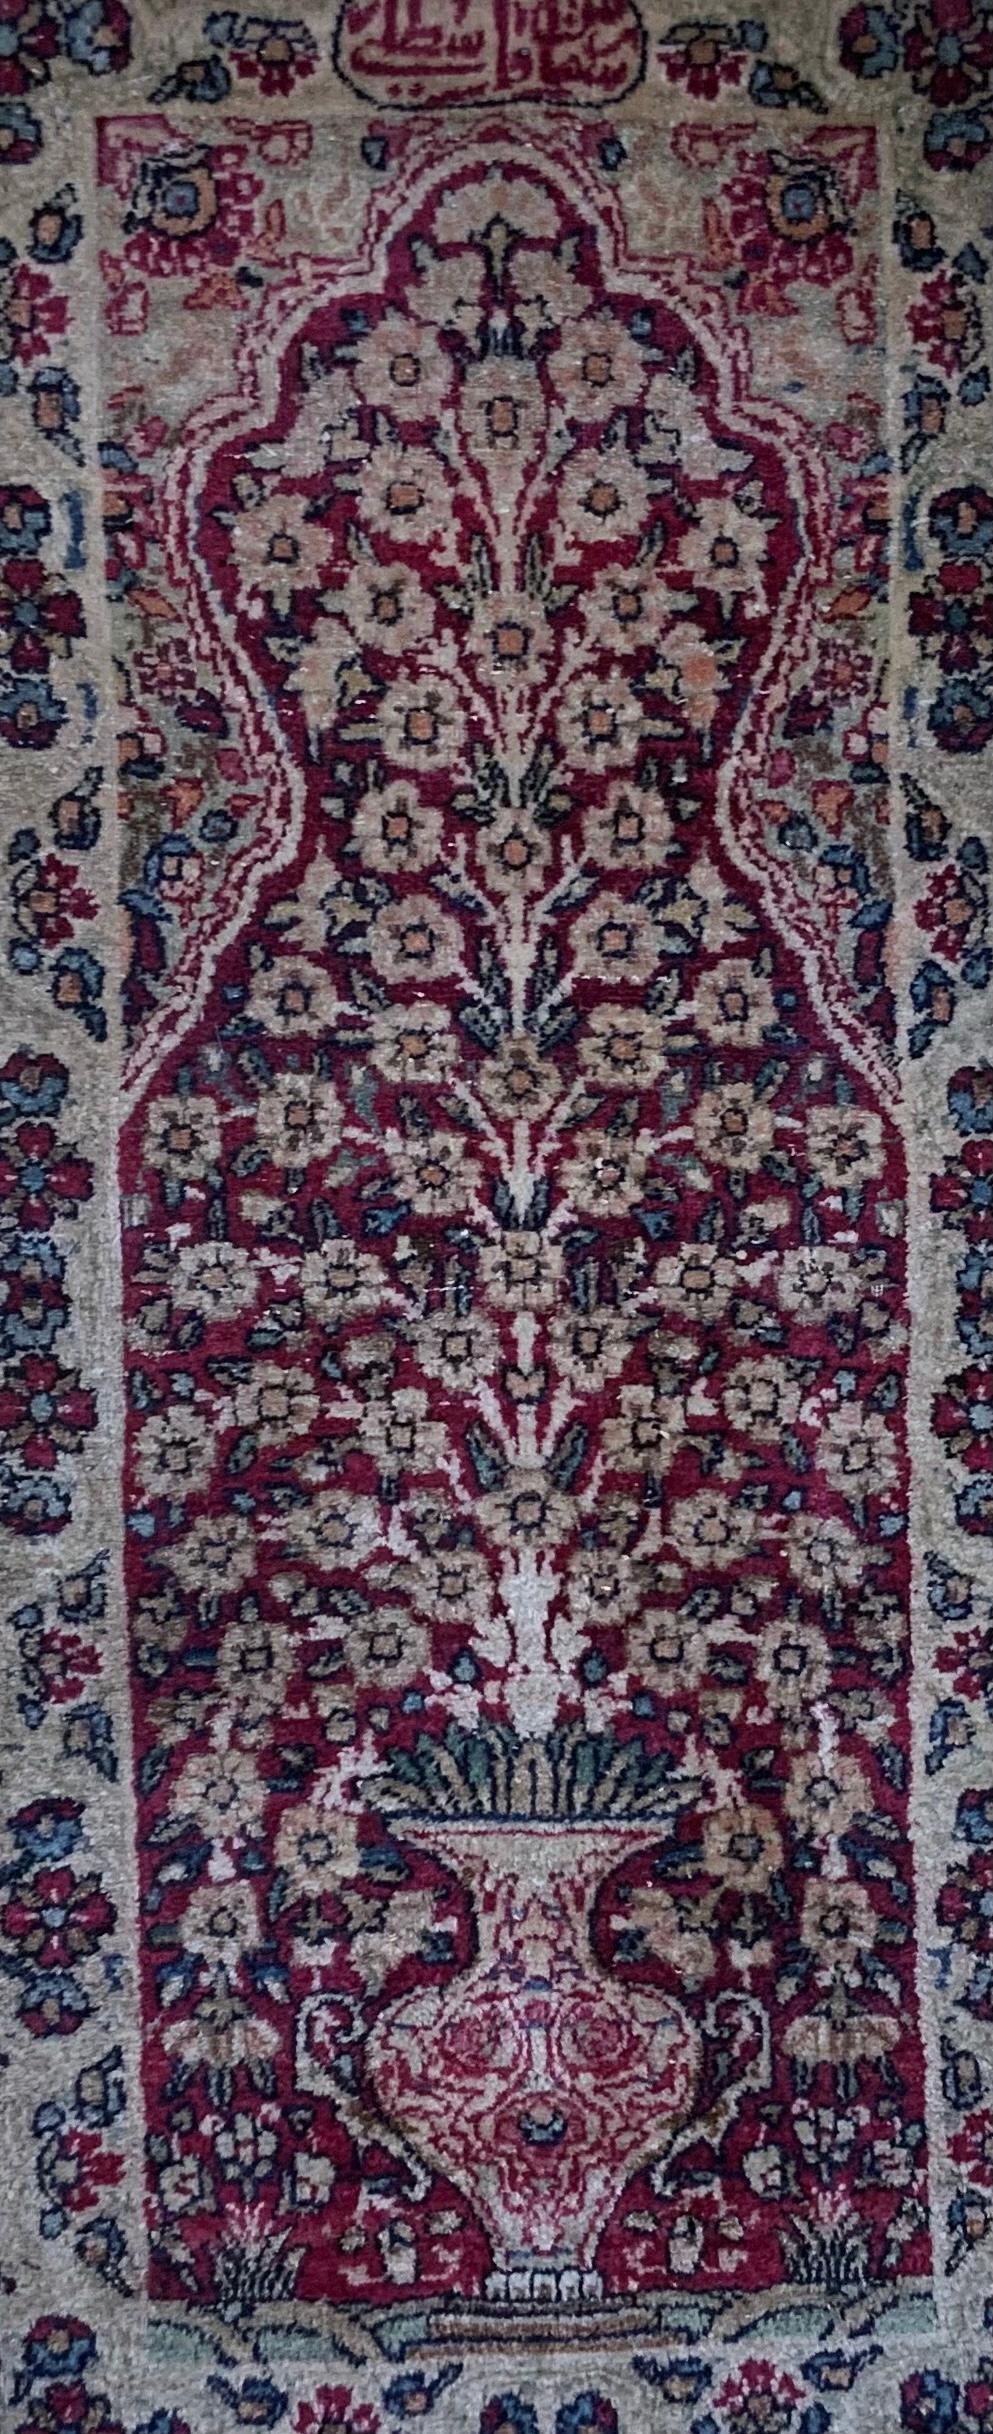 Small rug hand woven of cotton and wool, exceptional vase and flowers design, and signature of the artist weaver on the top. Could use as small floor rug, or as hanging wall tapestry. The rug was professionally hand wash before presented for